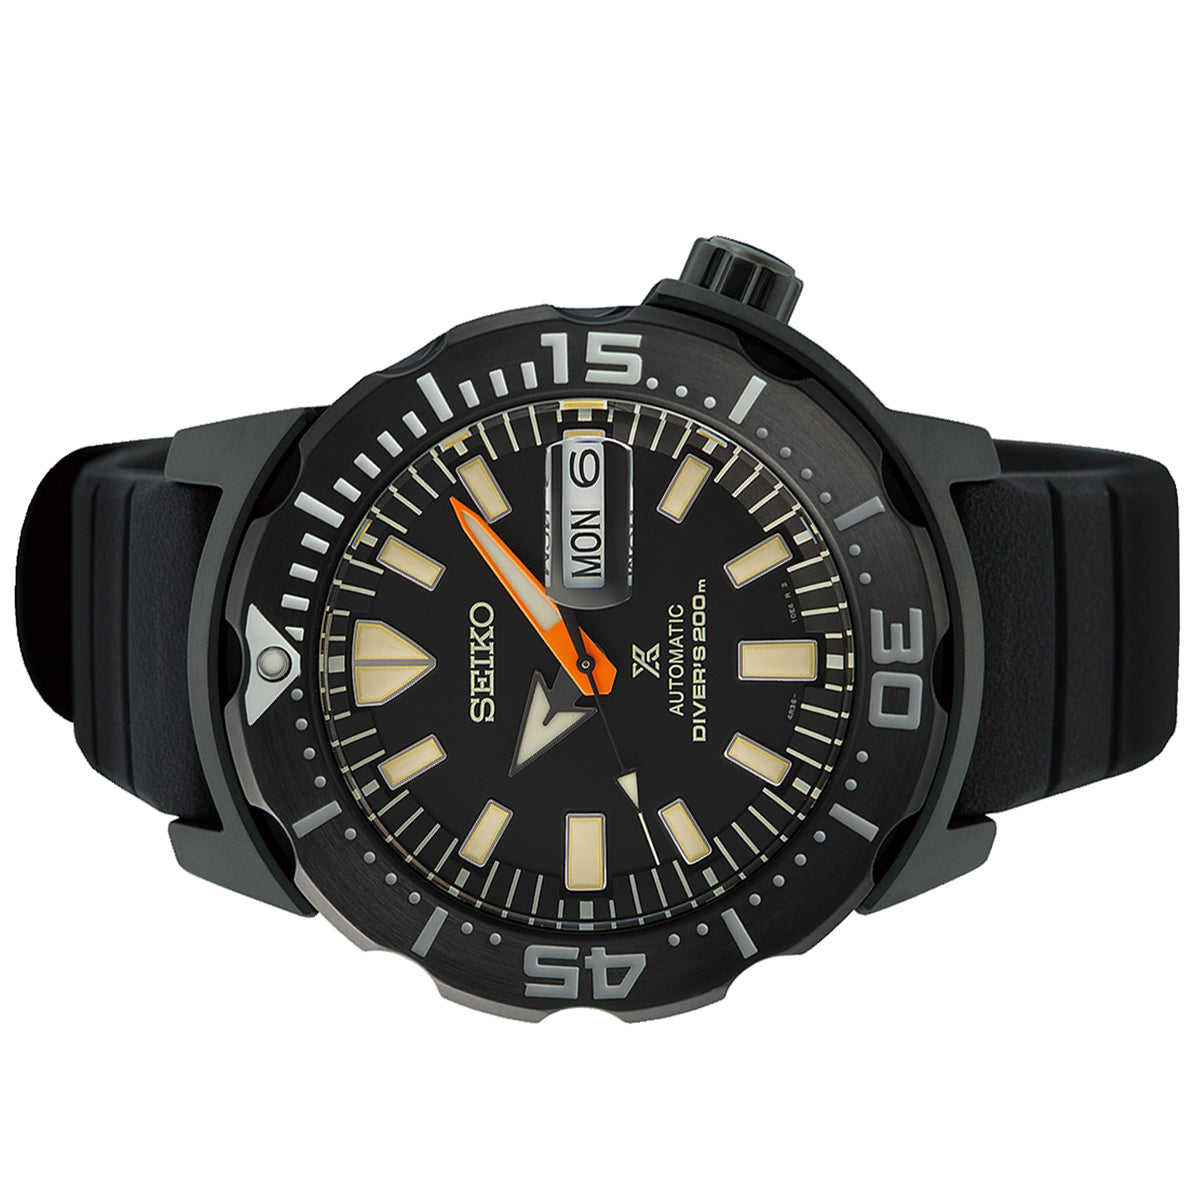 Seiko SRPH13K1 Prospex Black Series Monster Limited Edition Automatic Diver Watch Men-Watch Portal Philippines